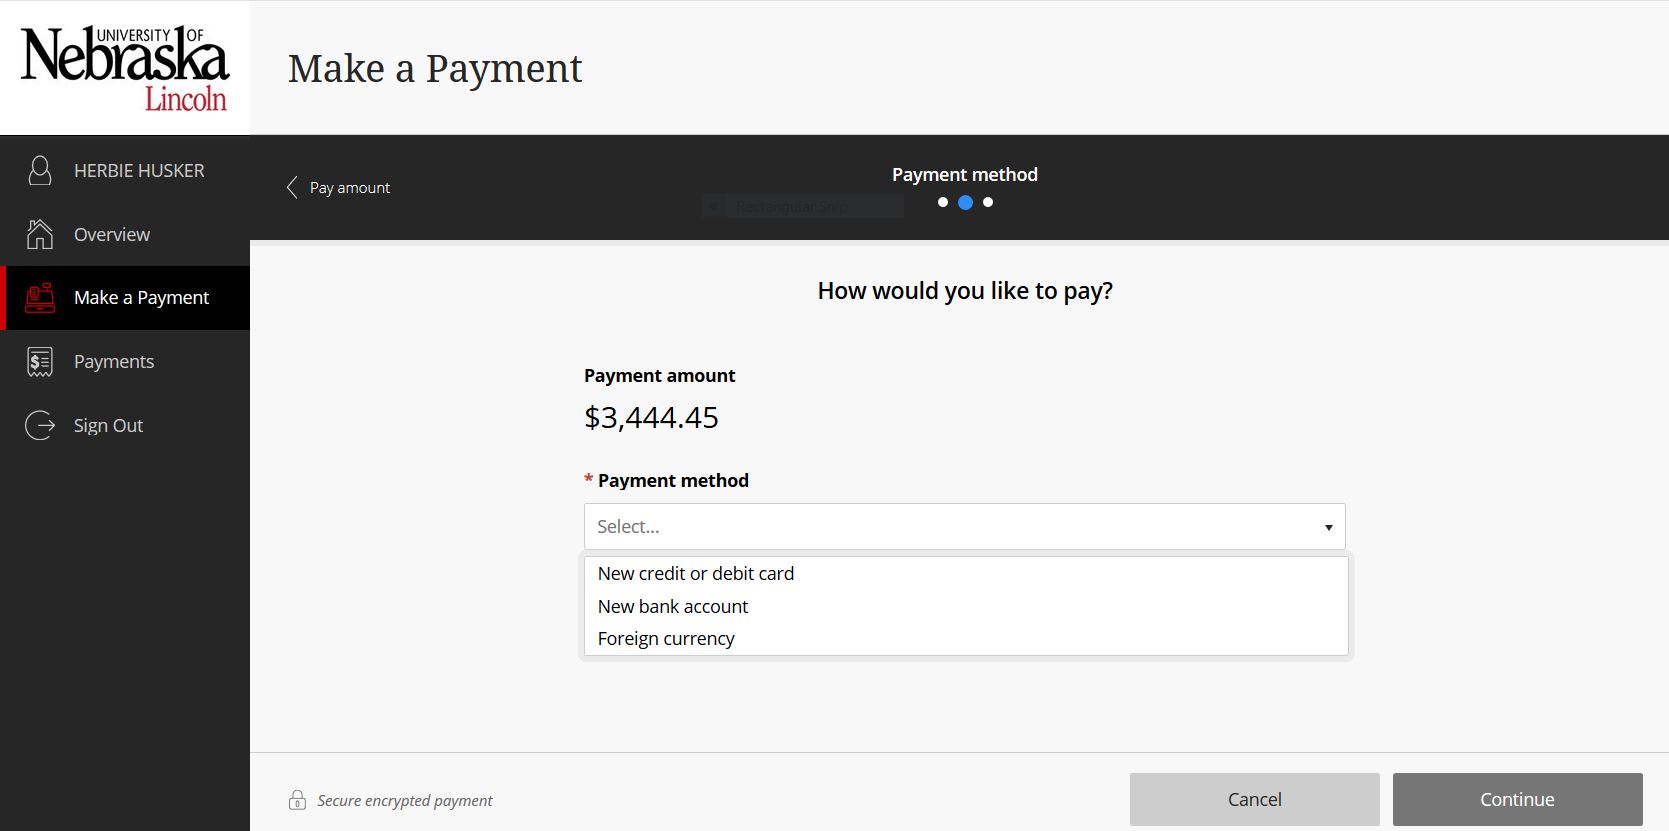 Make a payment screen shows payment method dropdown